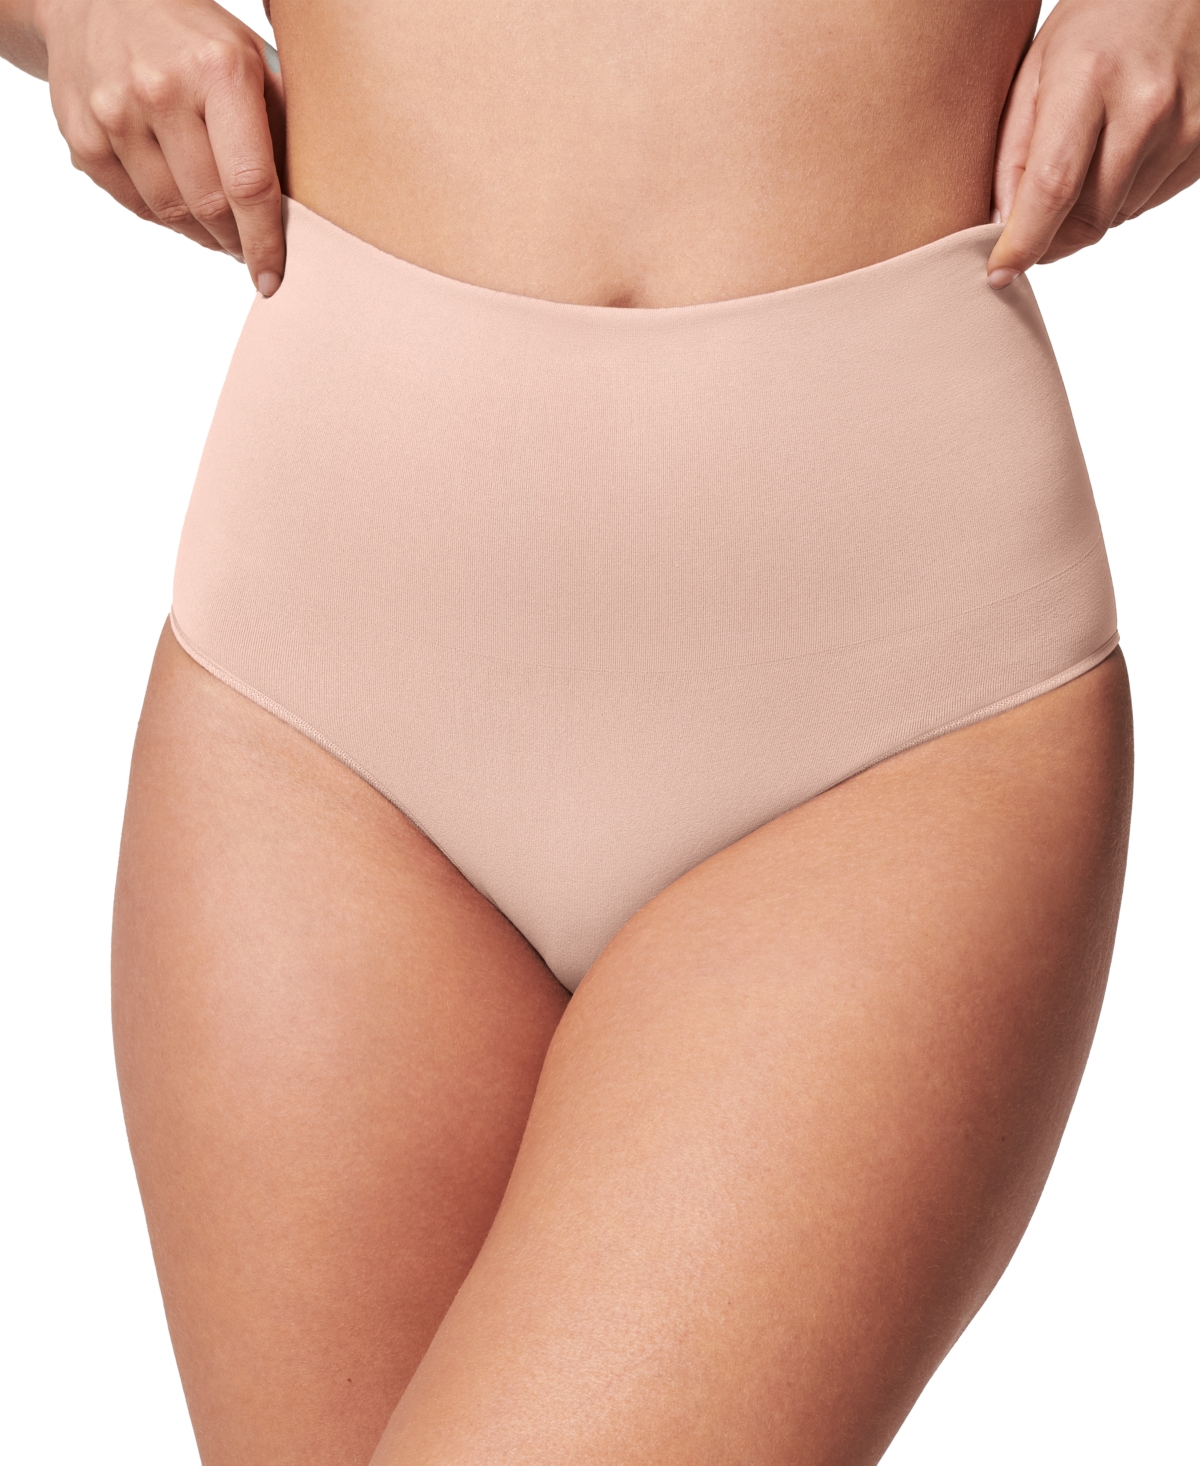 Spanx Women's Seamless Shaping Brief Underwear 40047r In Toasted Oatmeal